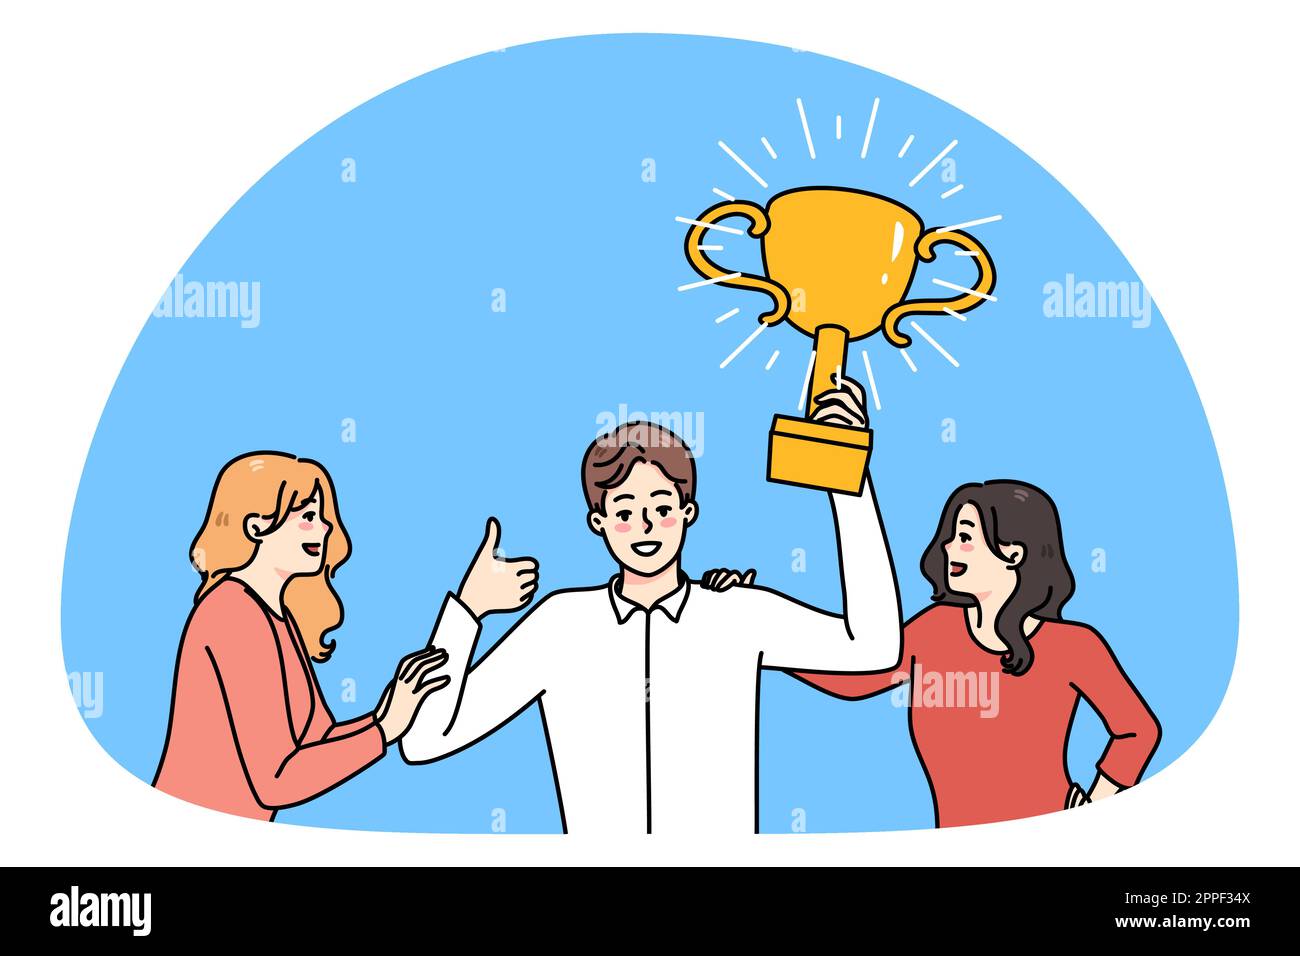 Overjoyed man employee with golden trophy in hands feel confident winning. Smiling women attracted to successful businessman holding award. Success and victory. Vector illustration. Stock Vector